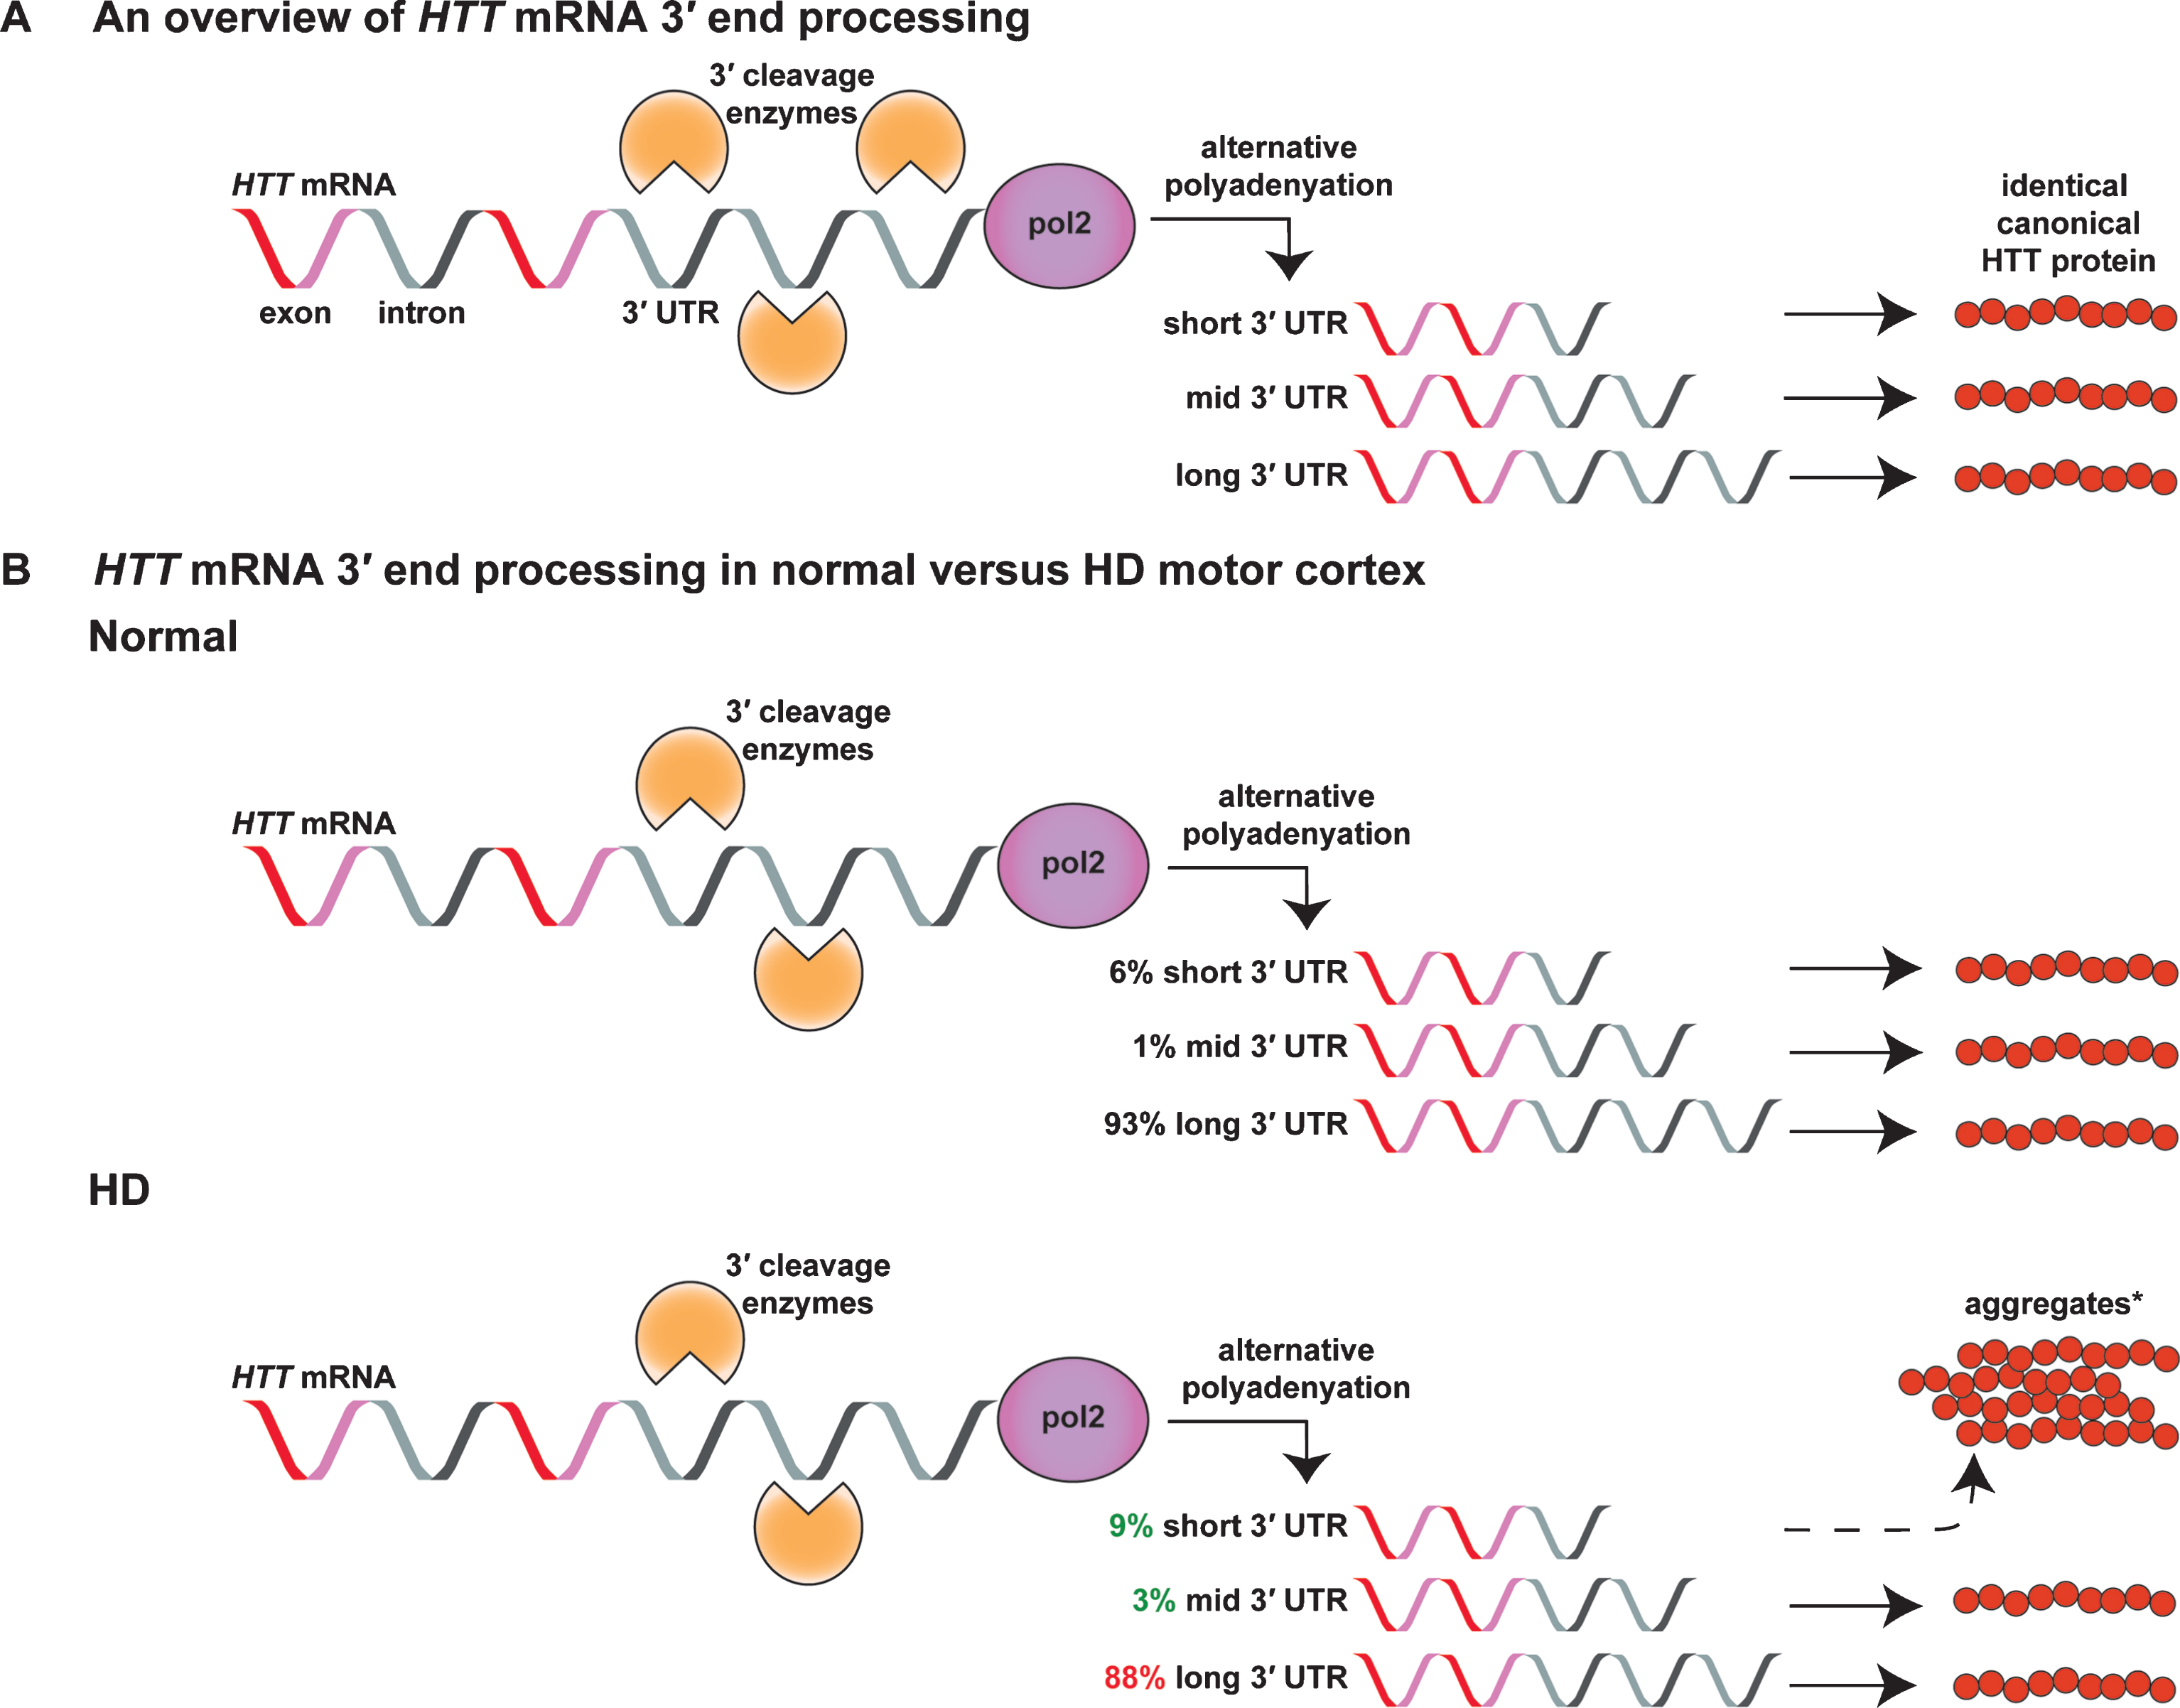 HTT mRNA is processed into several alternatively polyadenylated isoforms that change their abundance in HD versus normal human motor cortex. A) The HTT gene is transcribed into mRNA by RNA polymerase 2 (pol2). During transcription, nascent HTT mRNA can be alternatively cleaved and polyadenylated at three putative polyA sites in its 3′UTR producing a 10.3 kb (short), 12.5 kb (mid), or 13.7 kb (long) transcript [22, 23]. These alternatively polyadenylated isoforms are translated into the canonical HTT protein. B) In HD patient motor cortex, the amount of the short and mid 3′UTR isoforms increases relative to the long isoform [23]. *The short 3′UTR isoform forms more aggregates than the long isoform in vitro [30], suggesting altered isoform abundance may have an impact on the formation of abnormal protein-protein interactions.